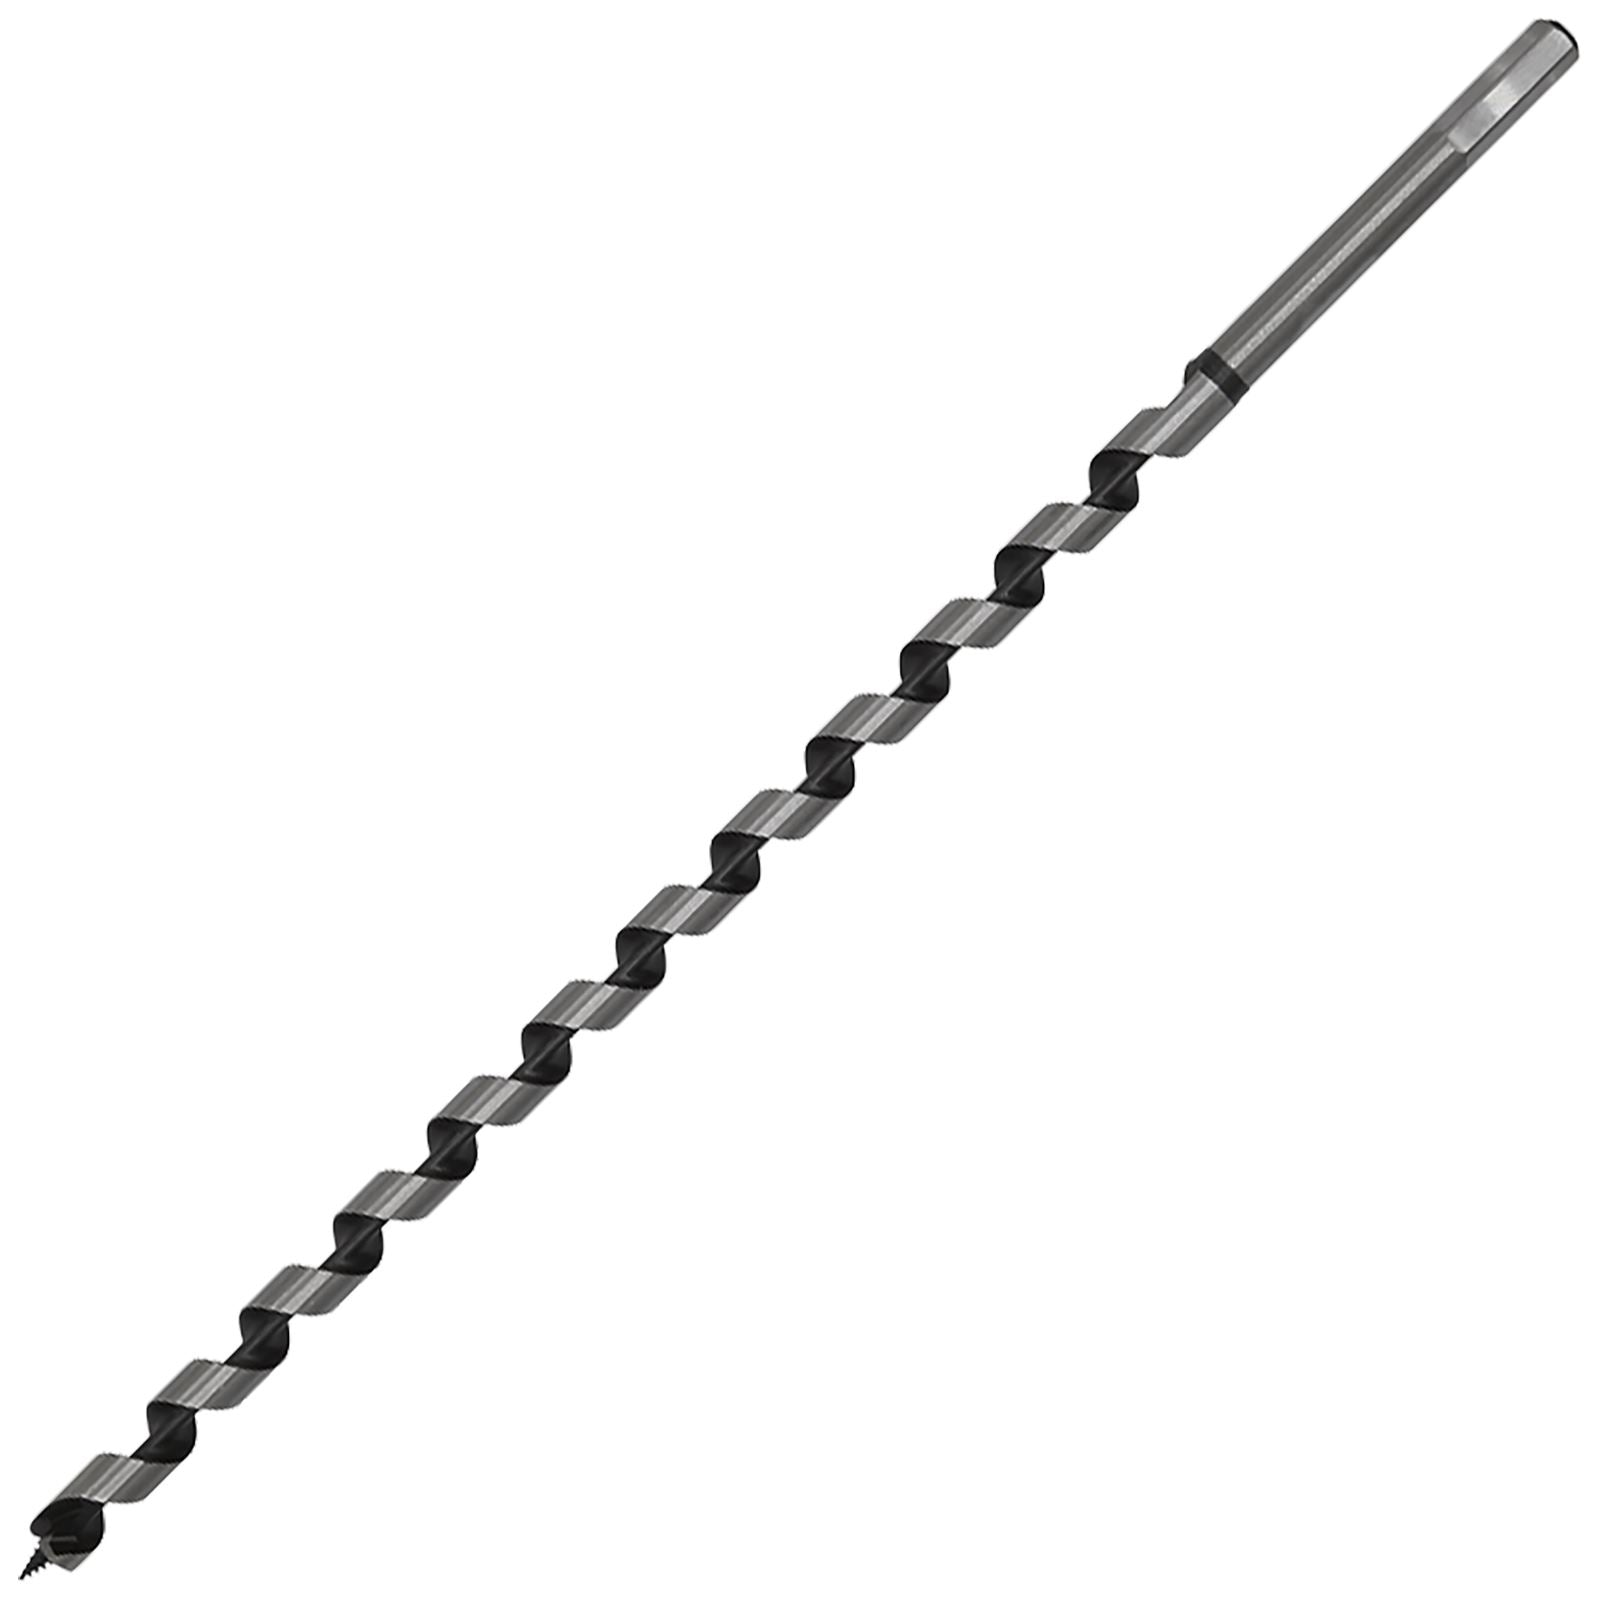 Worksafe by Sealey Auger Wood Drill Bit 14mm x 460mm